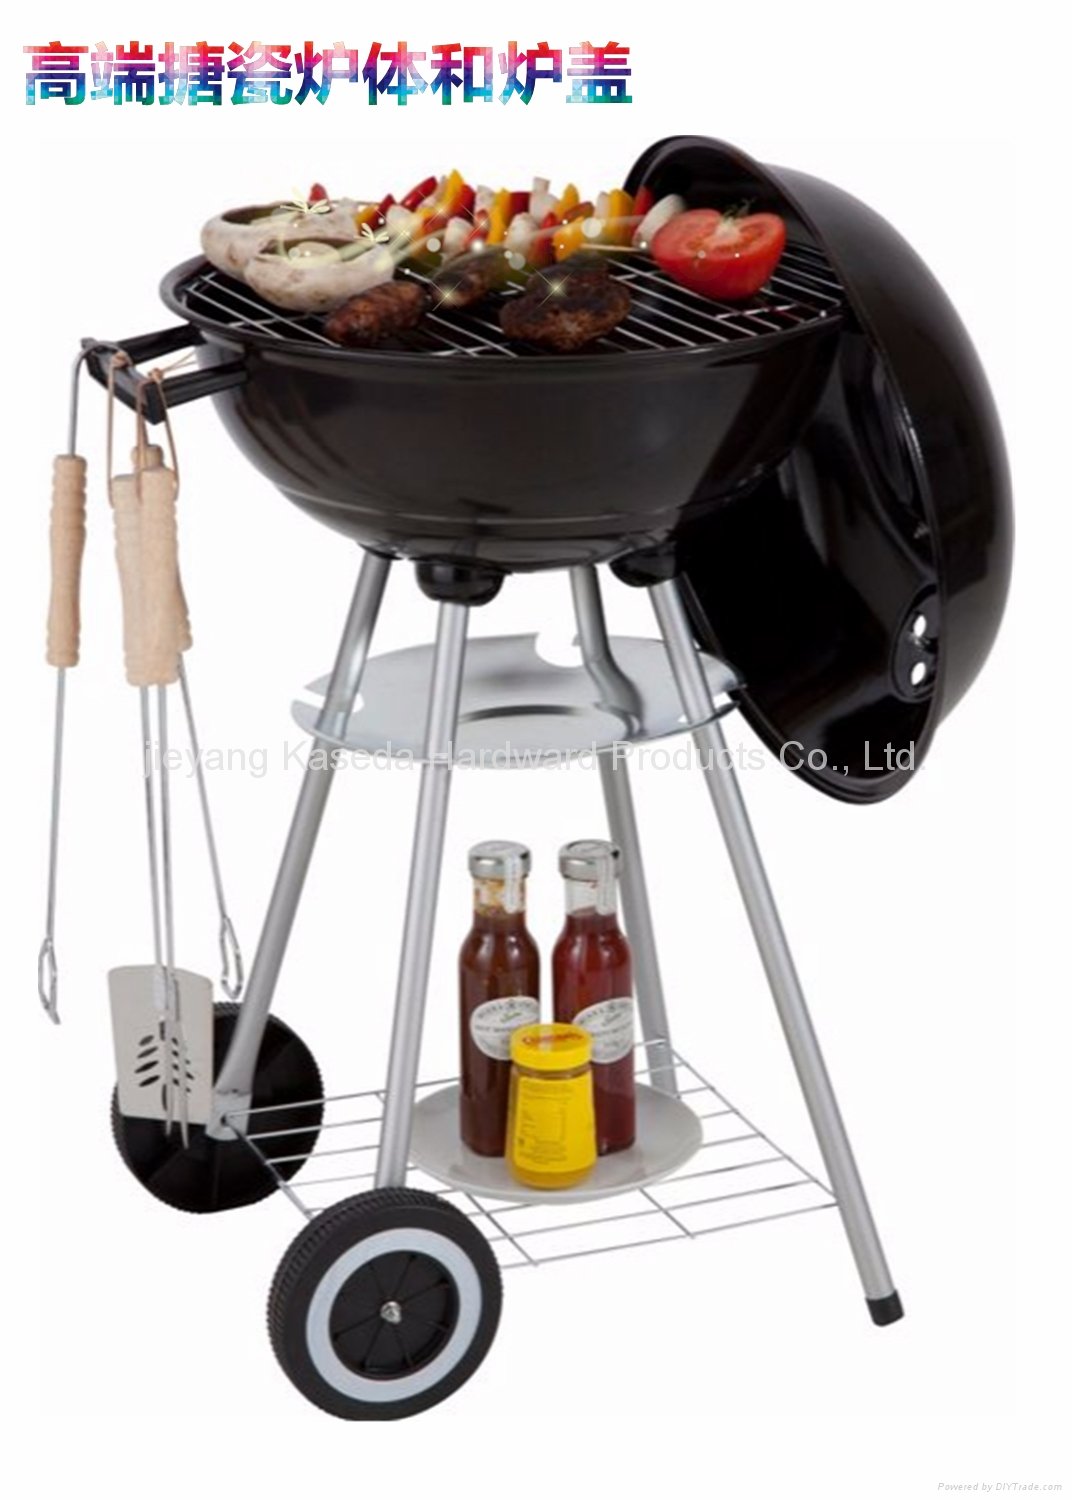 kettle charcoal bbq 2